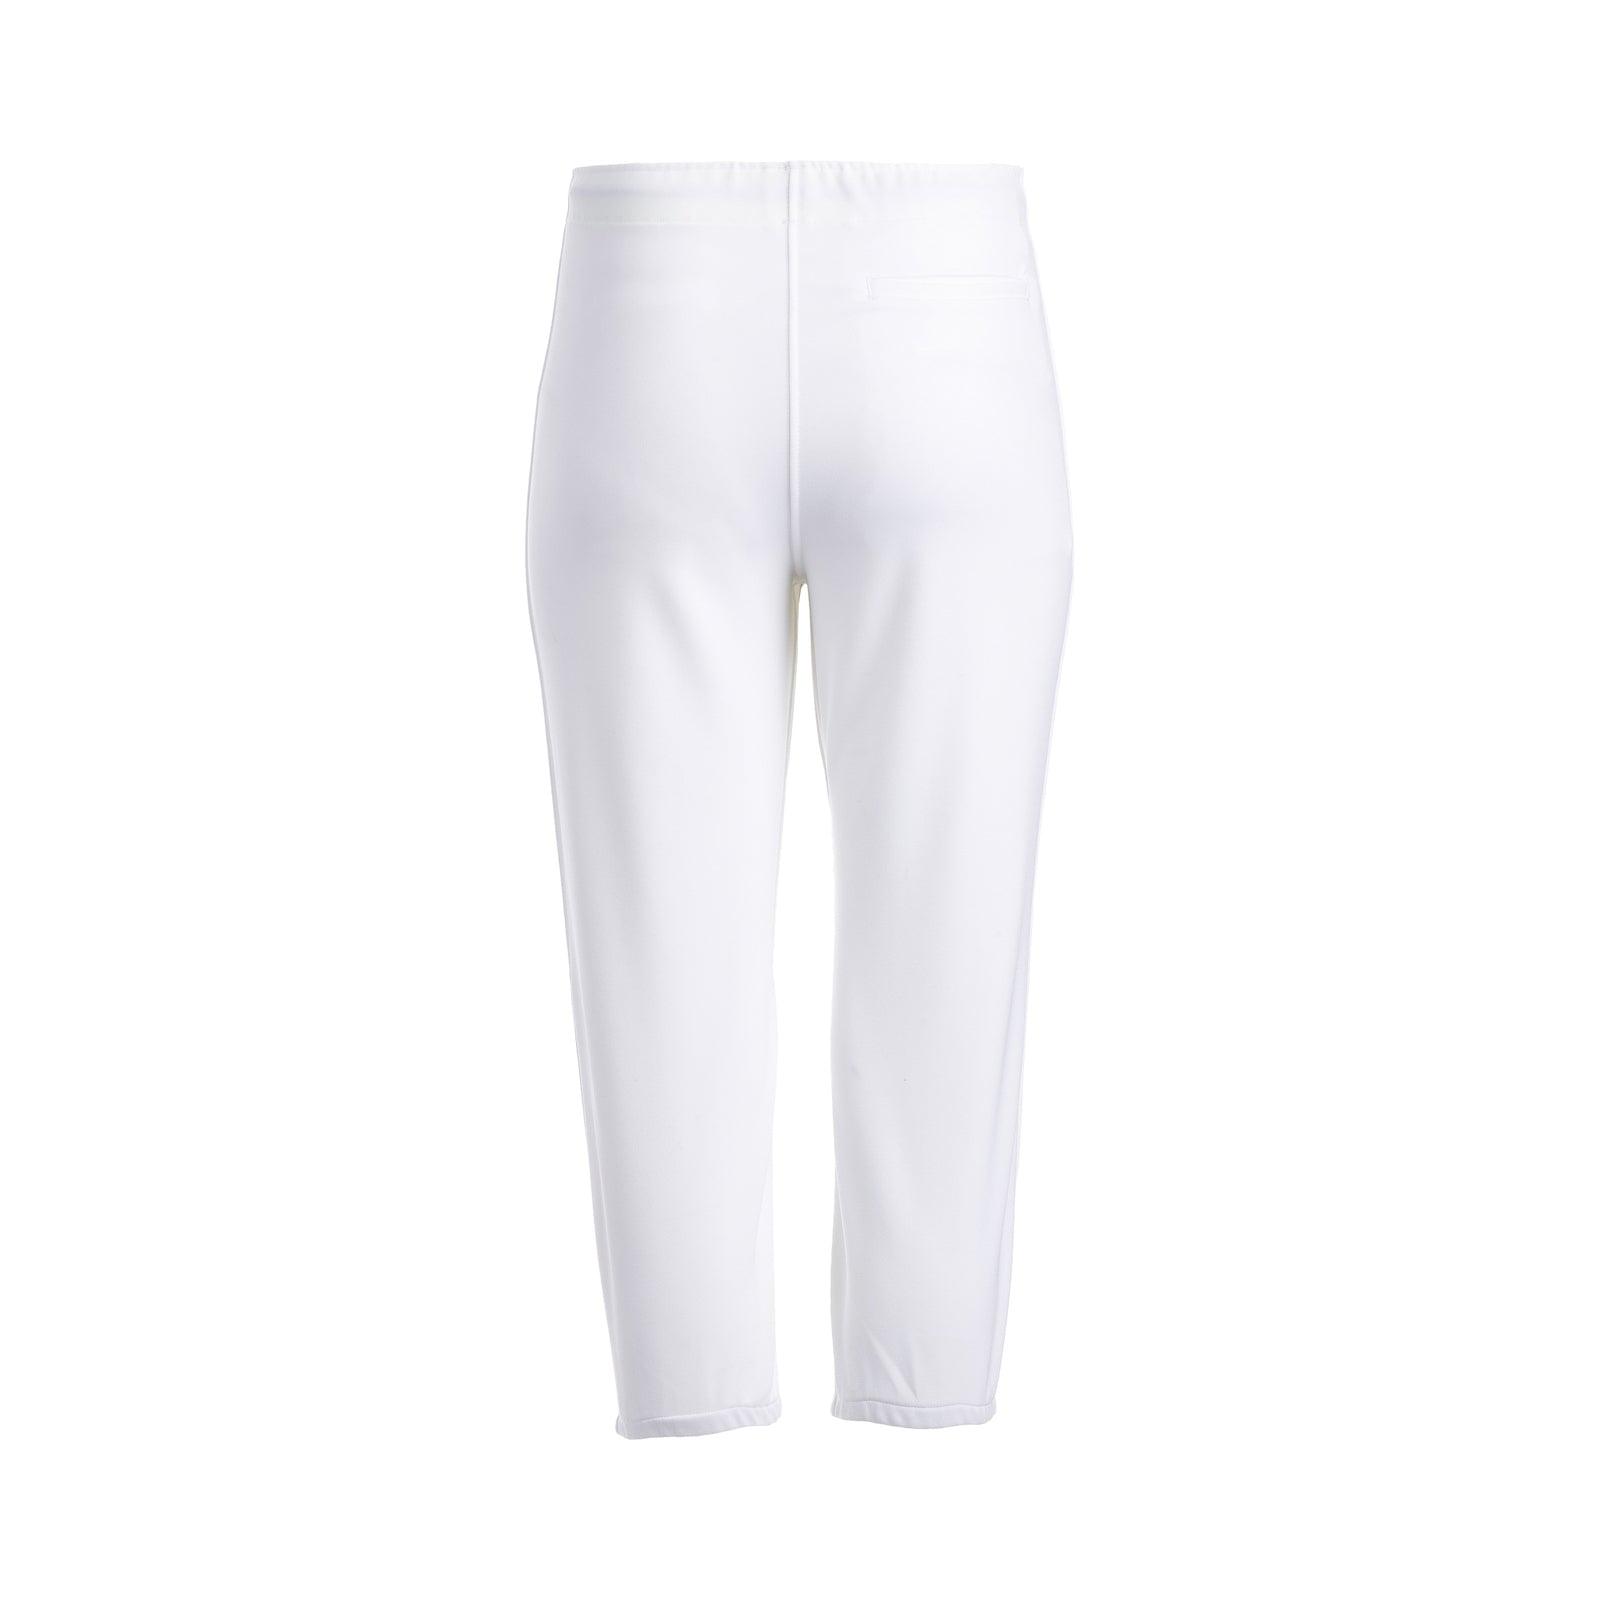 Stretch SB Pant Unbelted - Sports Excellence